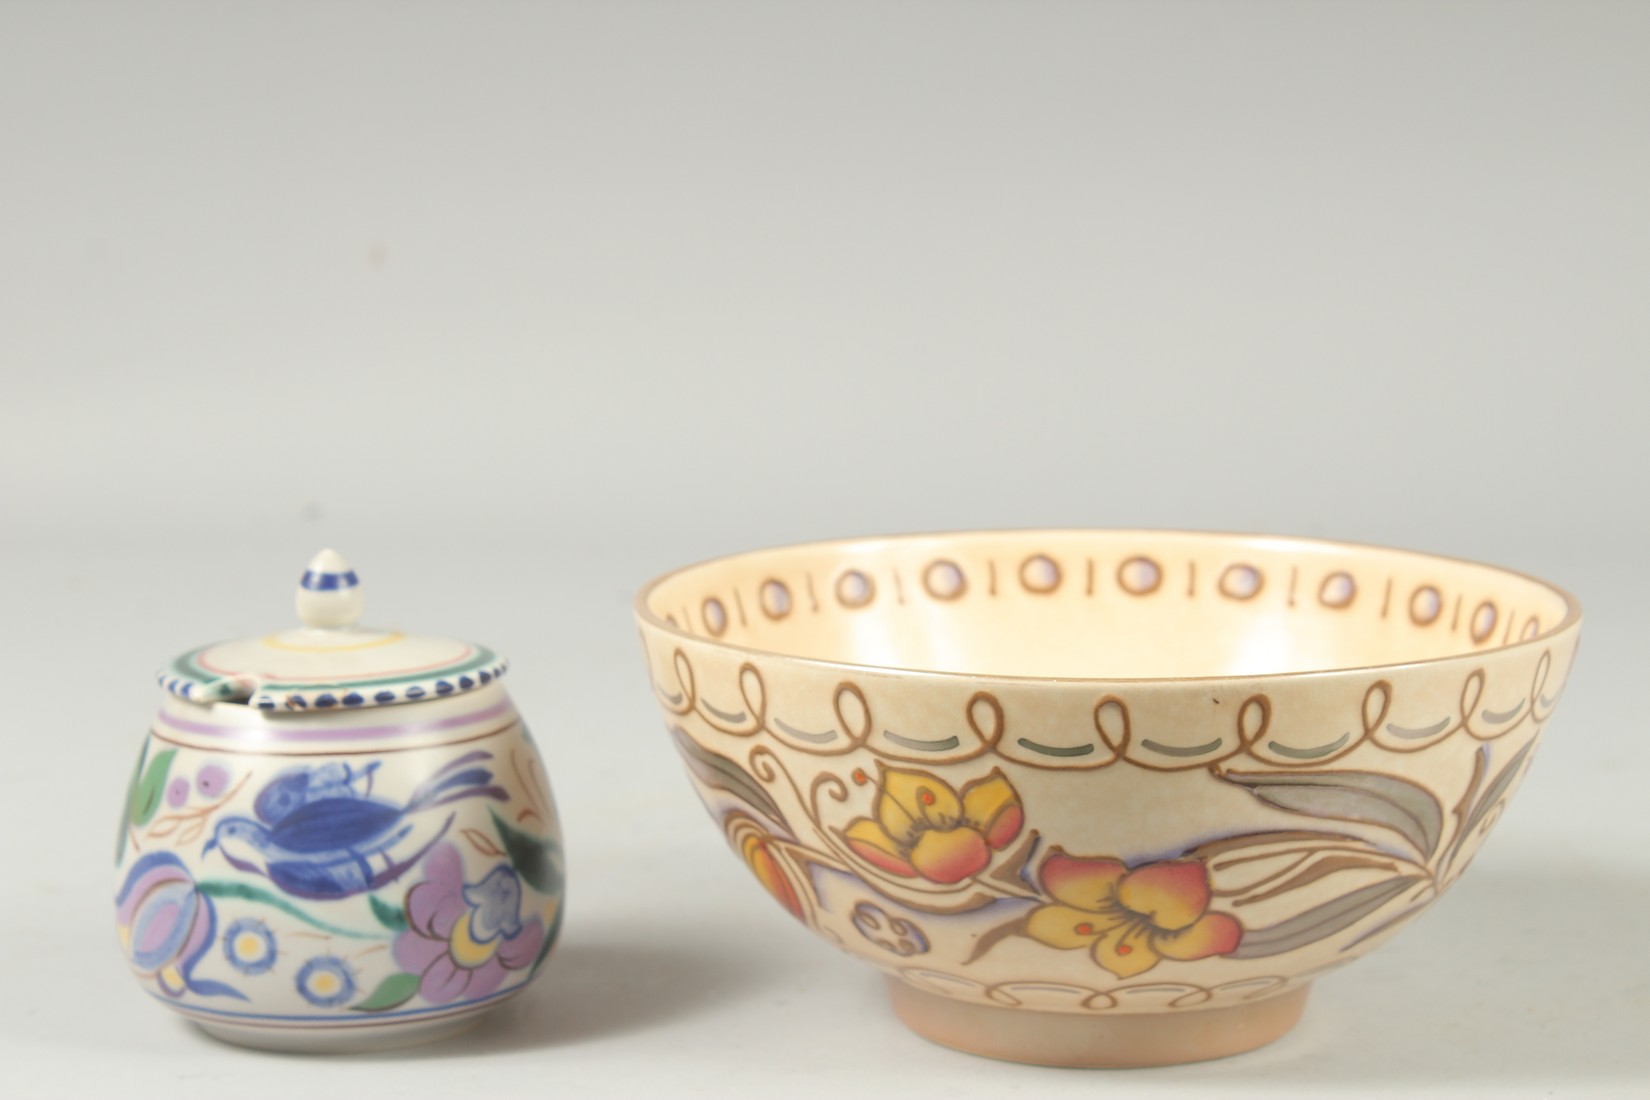 A BURLEY WARE CHARLOTTE READ CIRCULAR BOWL, 7.5ins diameter, and a POOLE HONEY POT AND COVER. 3.